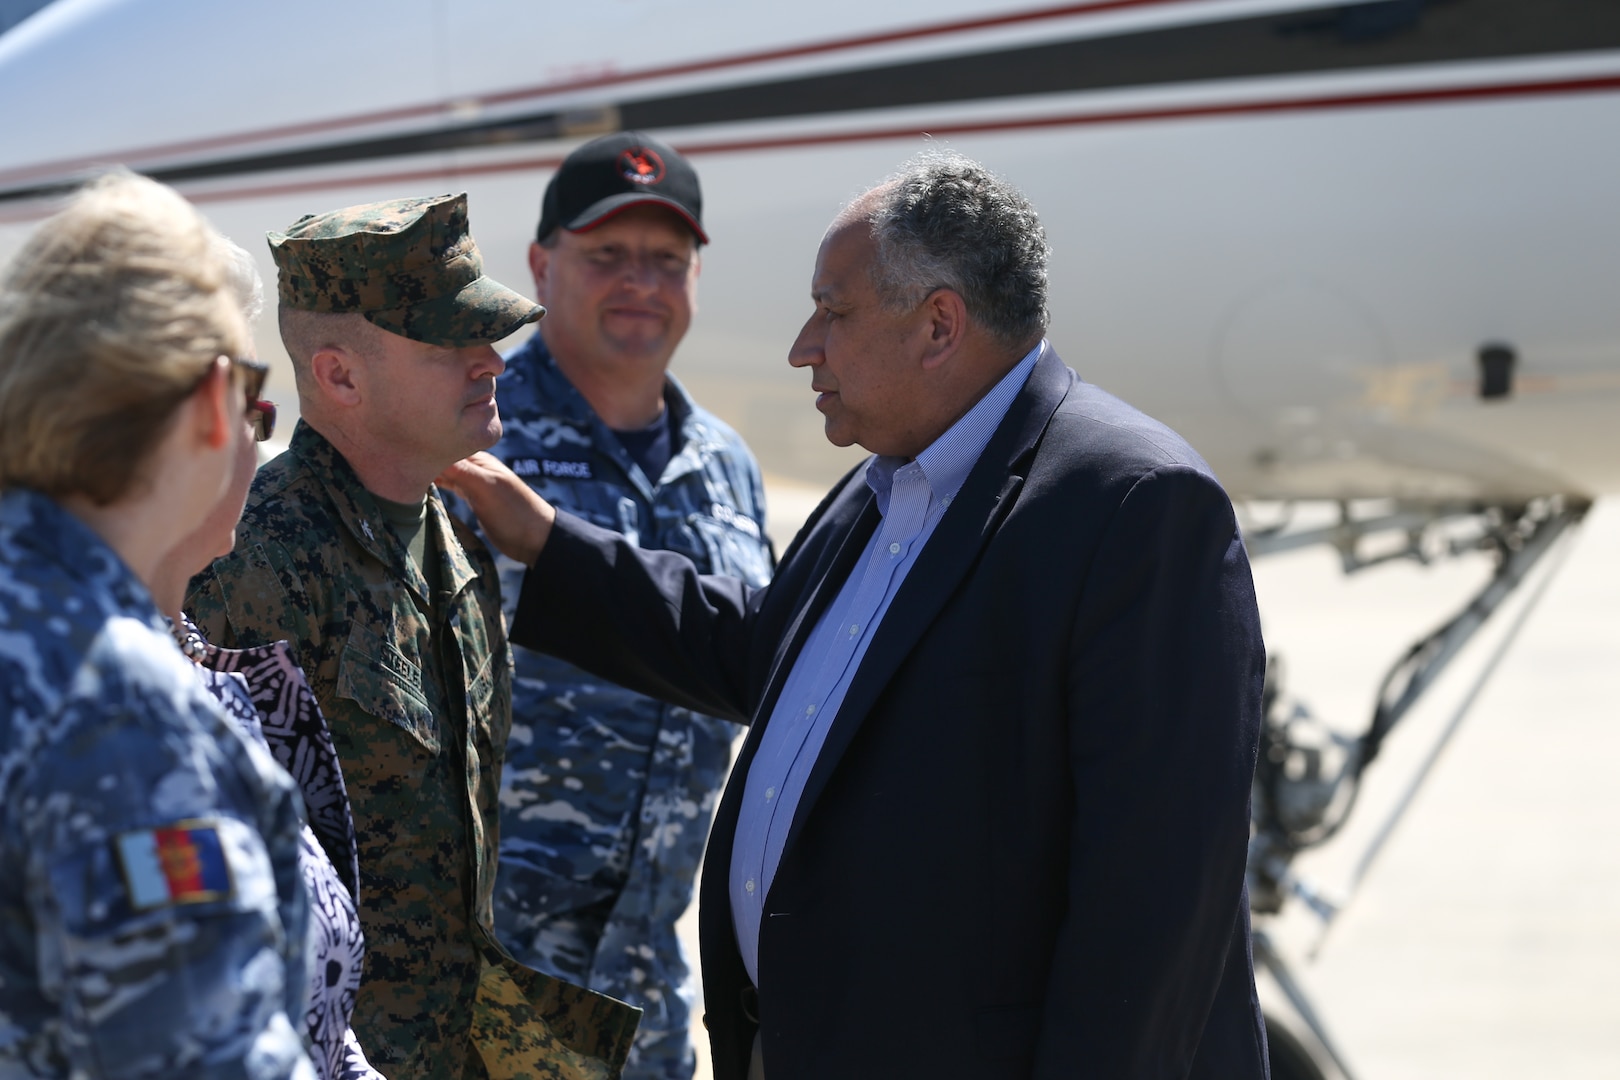 U.S. Secretary of the Navy Carlos Del Toro greets U.S. Marine Corps Col. Christopher Steele, the commanding officer of Marine Rotational Force-Darwin (MRF-D) 22, during a visit with MRF-D 22 at Royal Australian Air Force Base Darwin, June 18, 2022. Secretary Del Toro visited Marines and Sailors with MRF-D 22 and Australian Defence Force personnel as part of the Indo-Pacific battlefield circulation. (U.S. Marine Corps photo by Cpl. Emeline Molla)